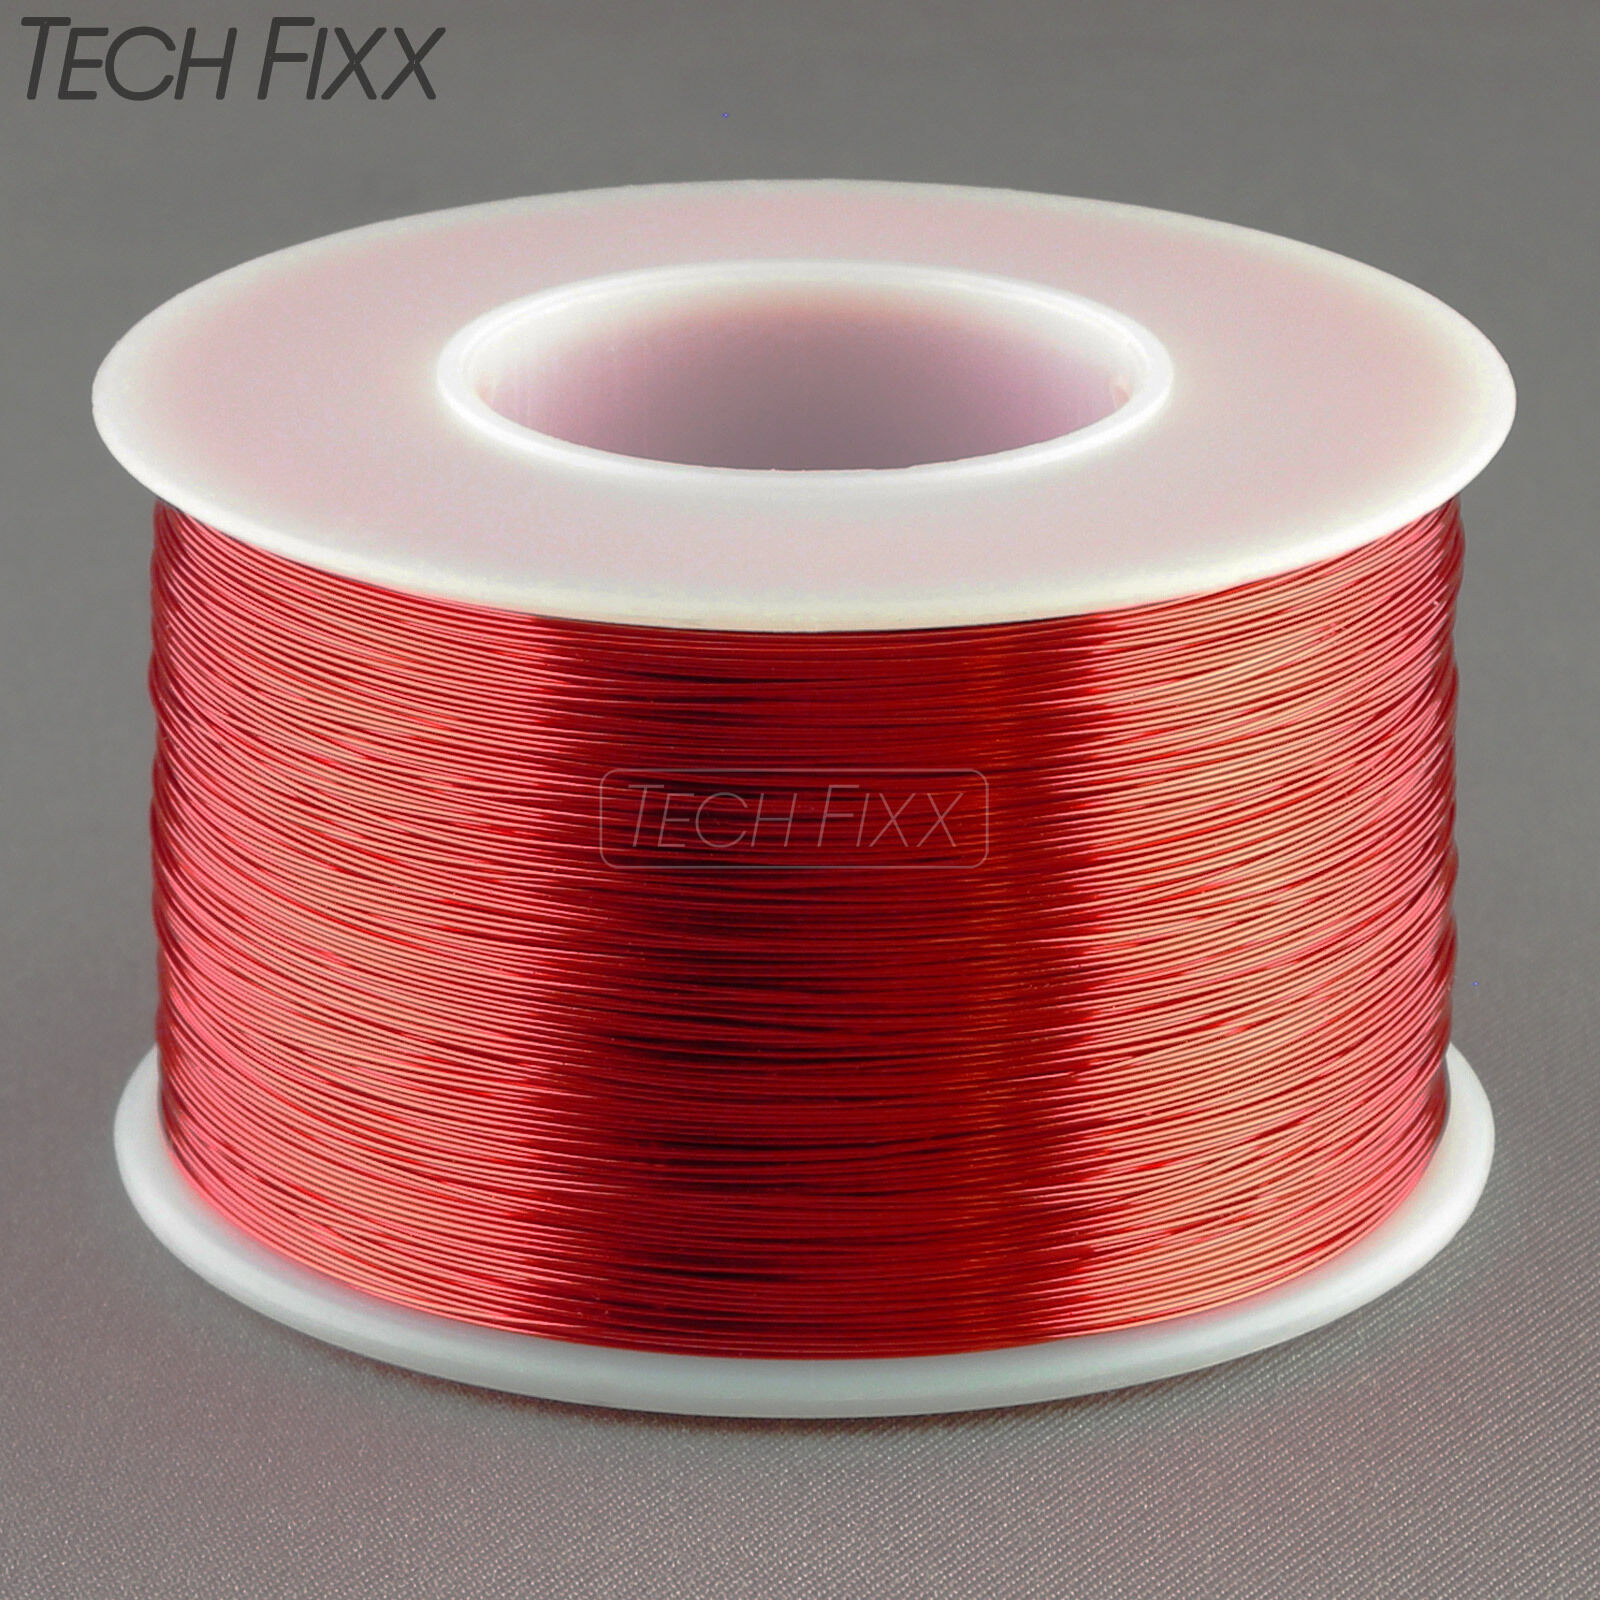 Magnet Wire 28 Gauge Awg Enameled Copper 1000 Feet Coil Winding 155c Red